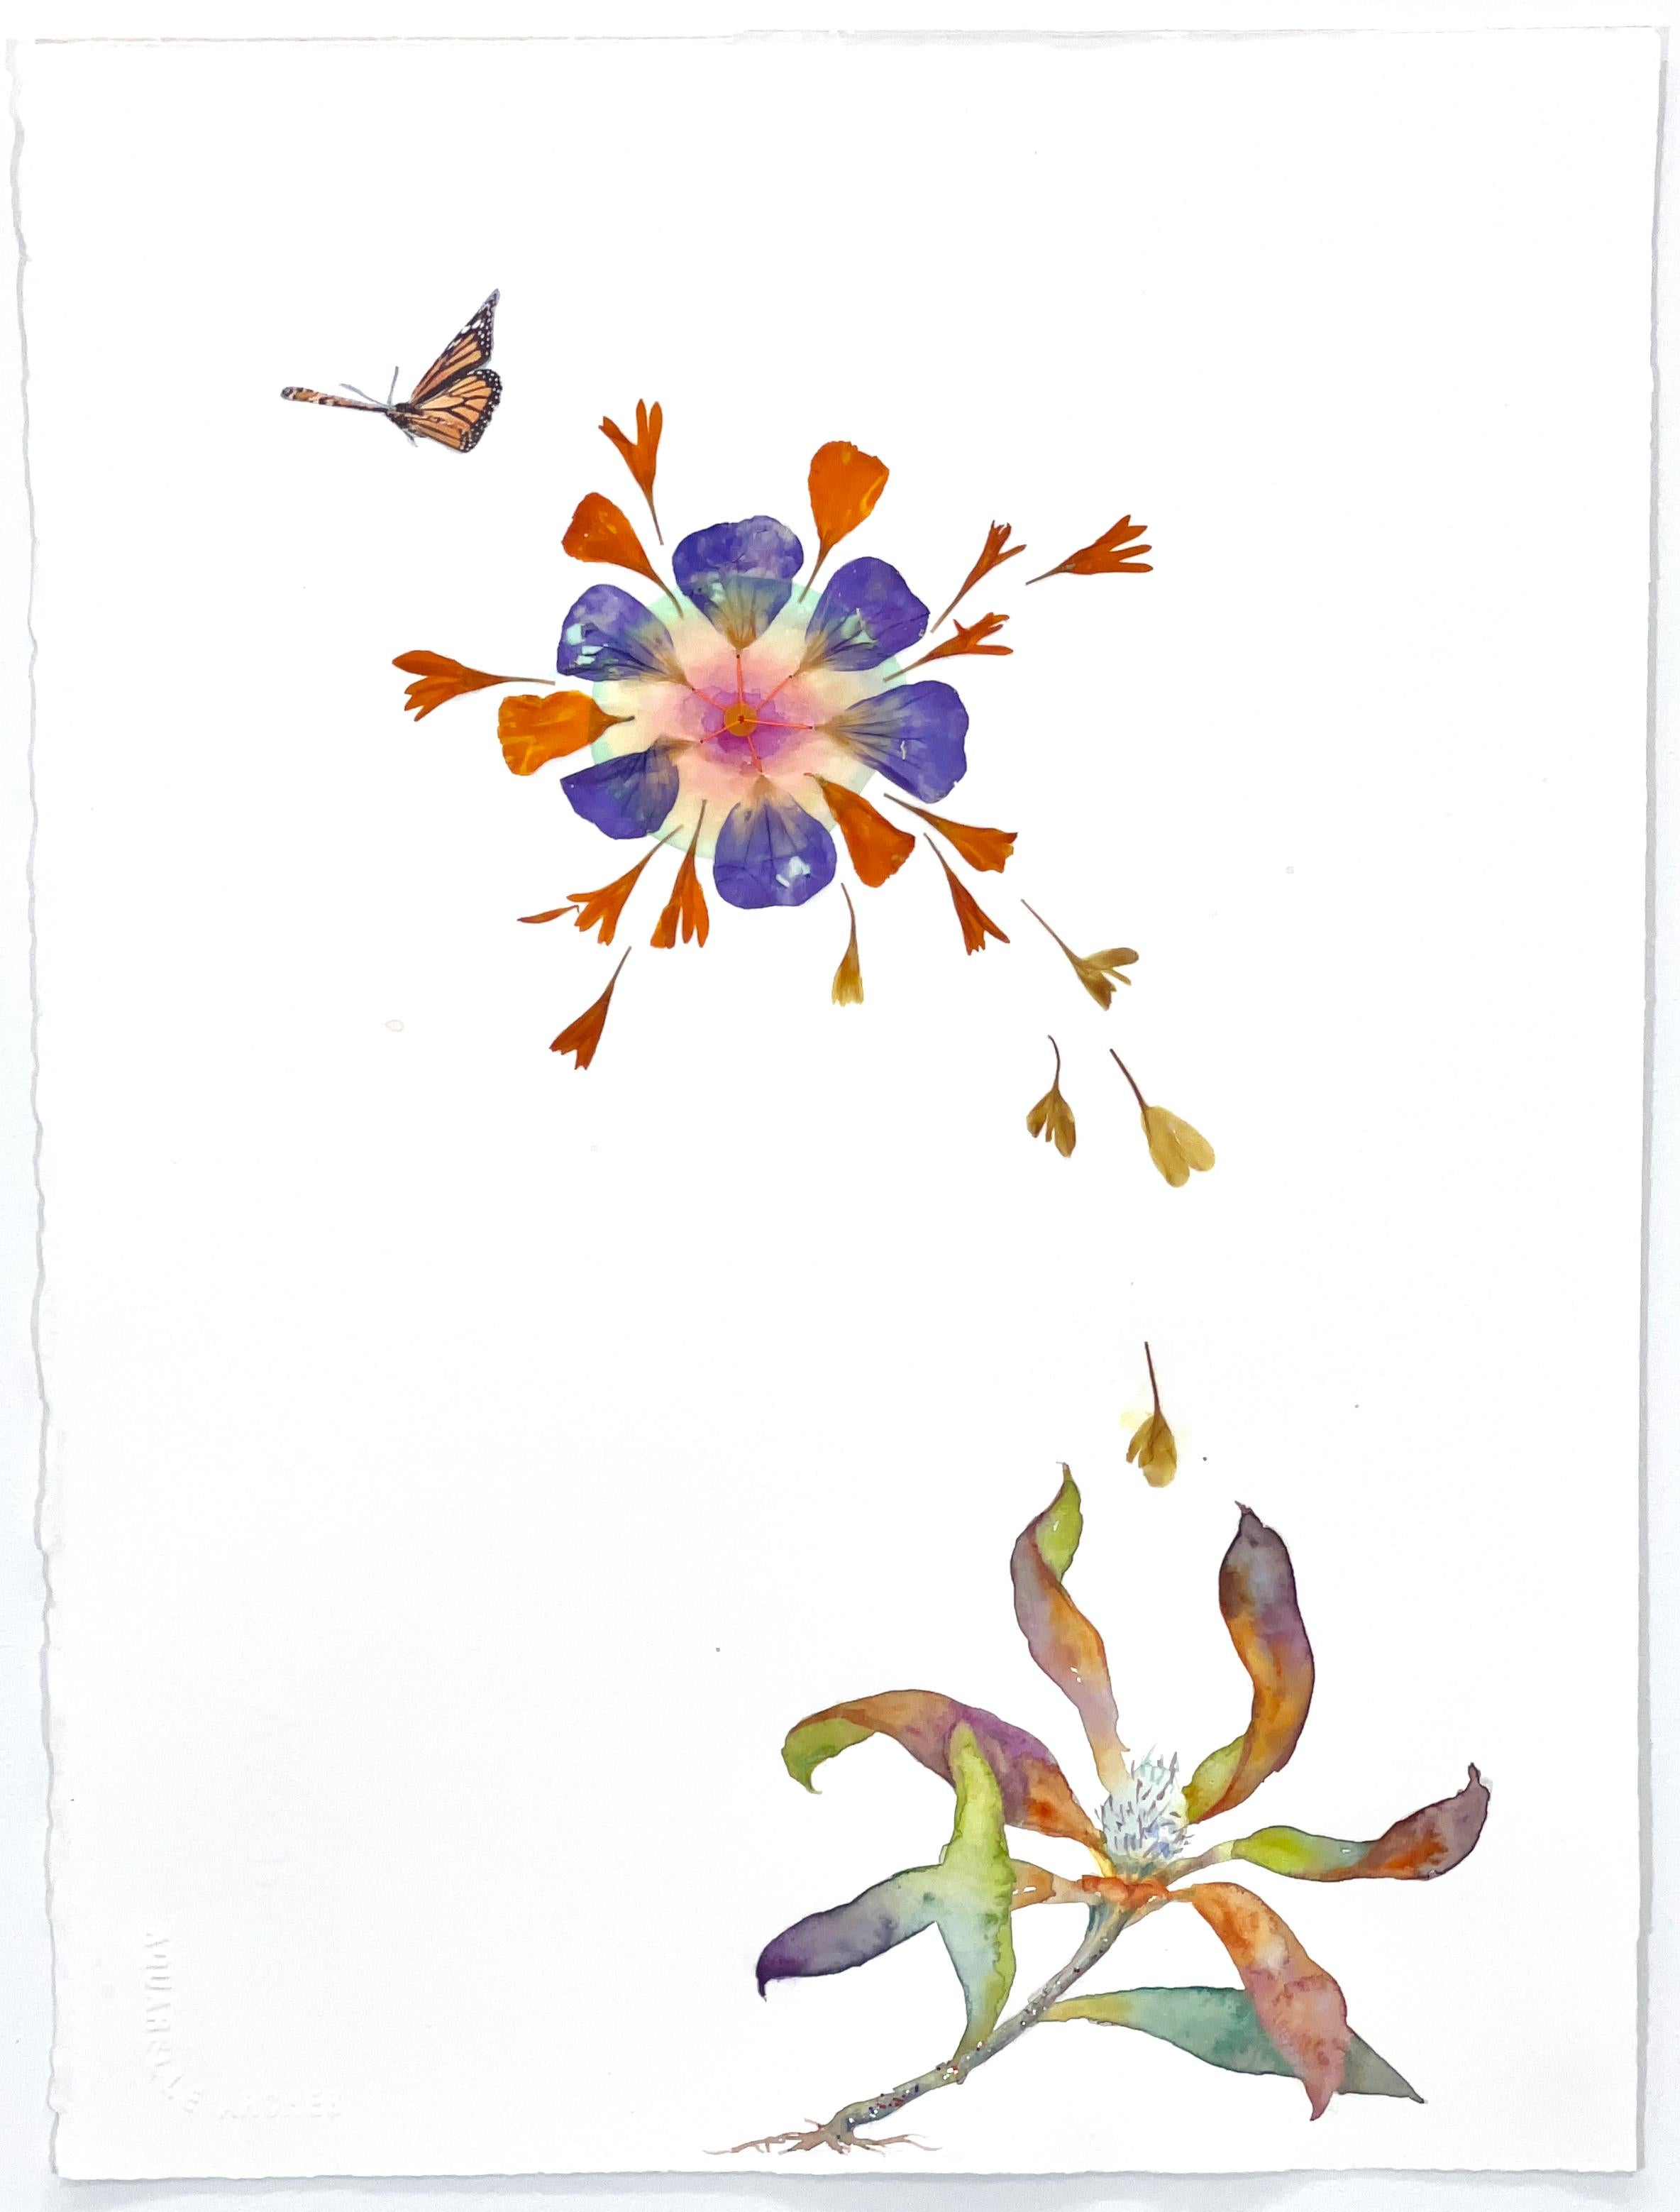 Marilla Palmer "Communicating Flowers" - Watercolor and Pressed Flowers on Paper